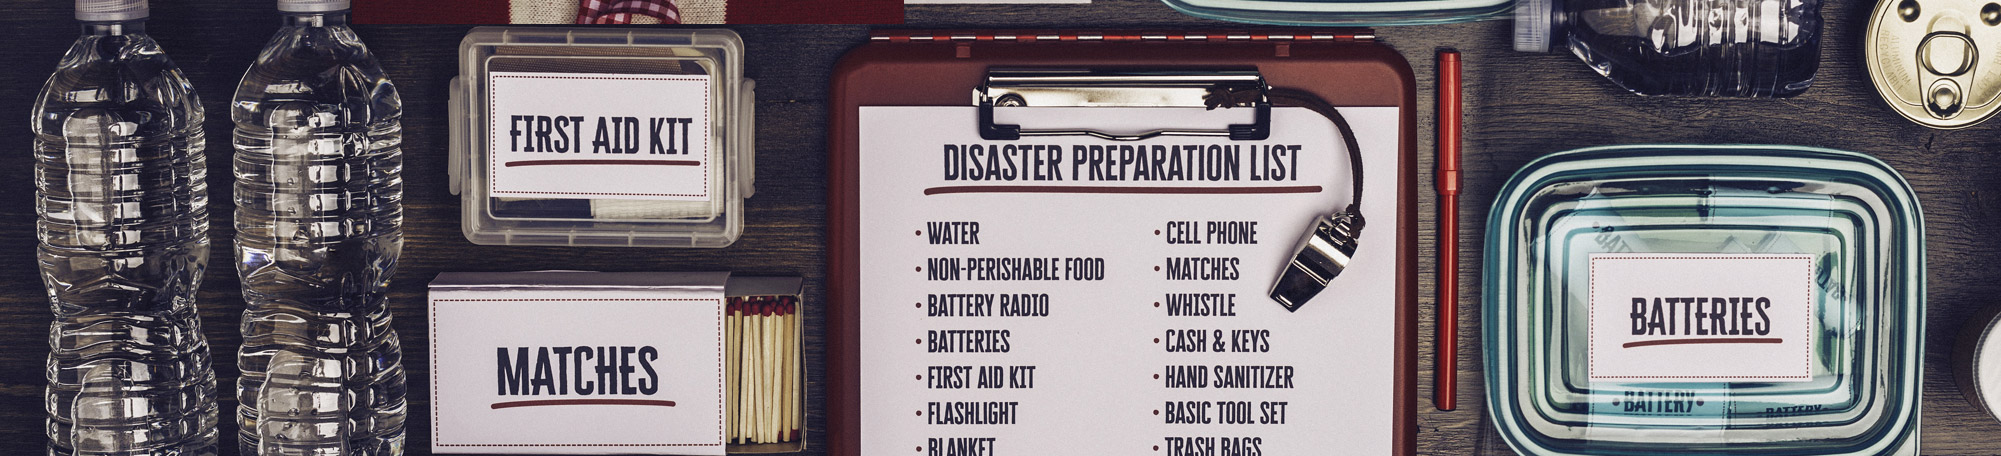 Image showing a disaster planning list and misc items on the list. Bottled water, matches, etc.